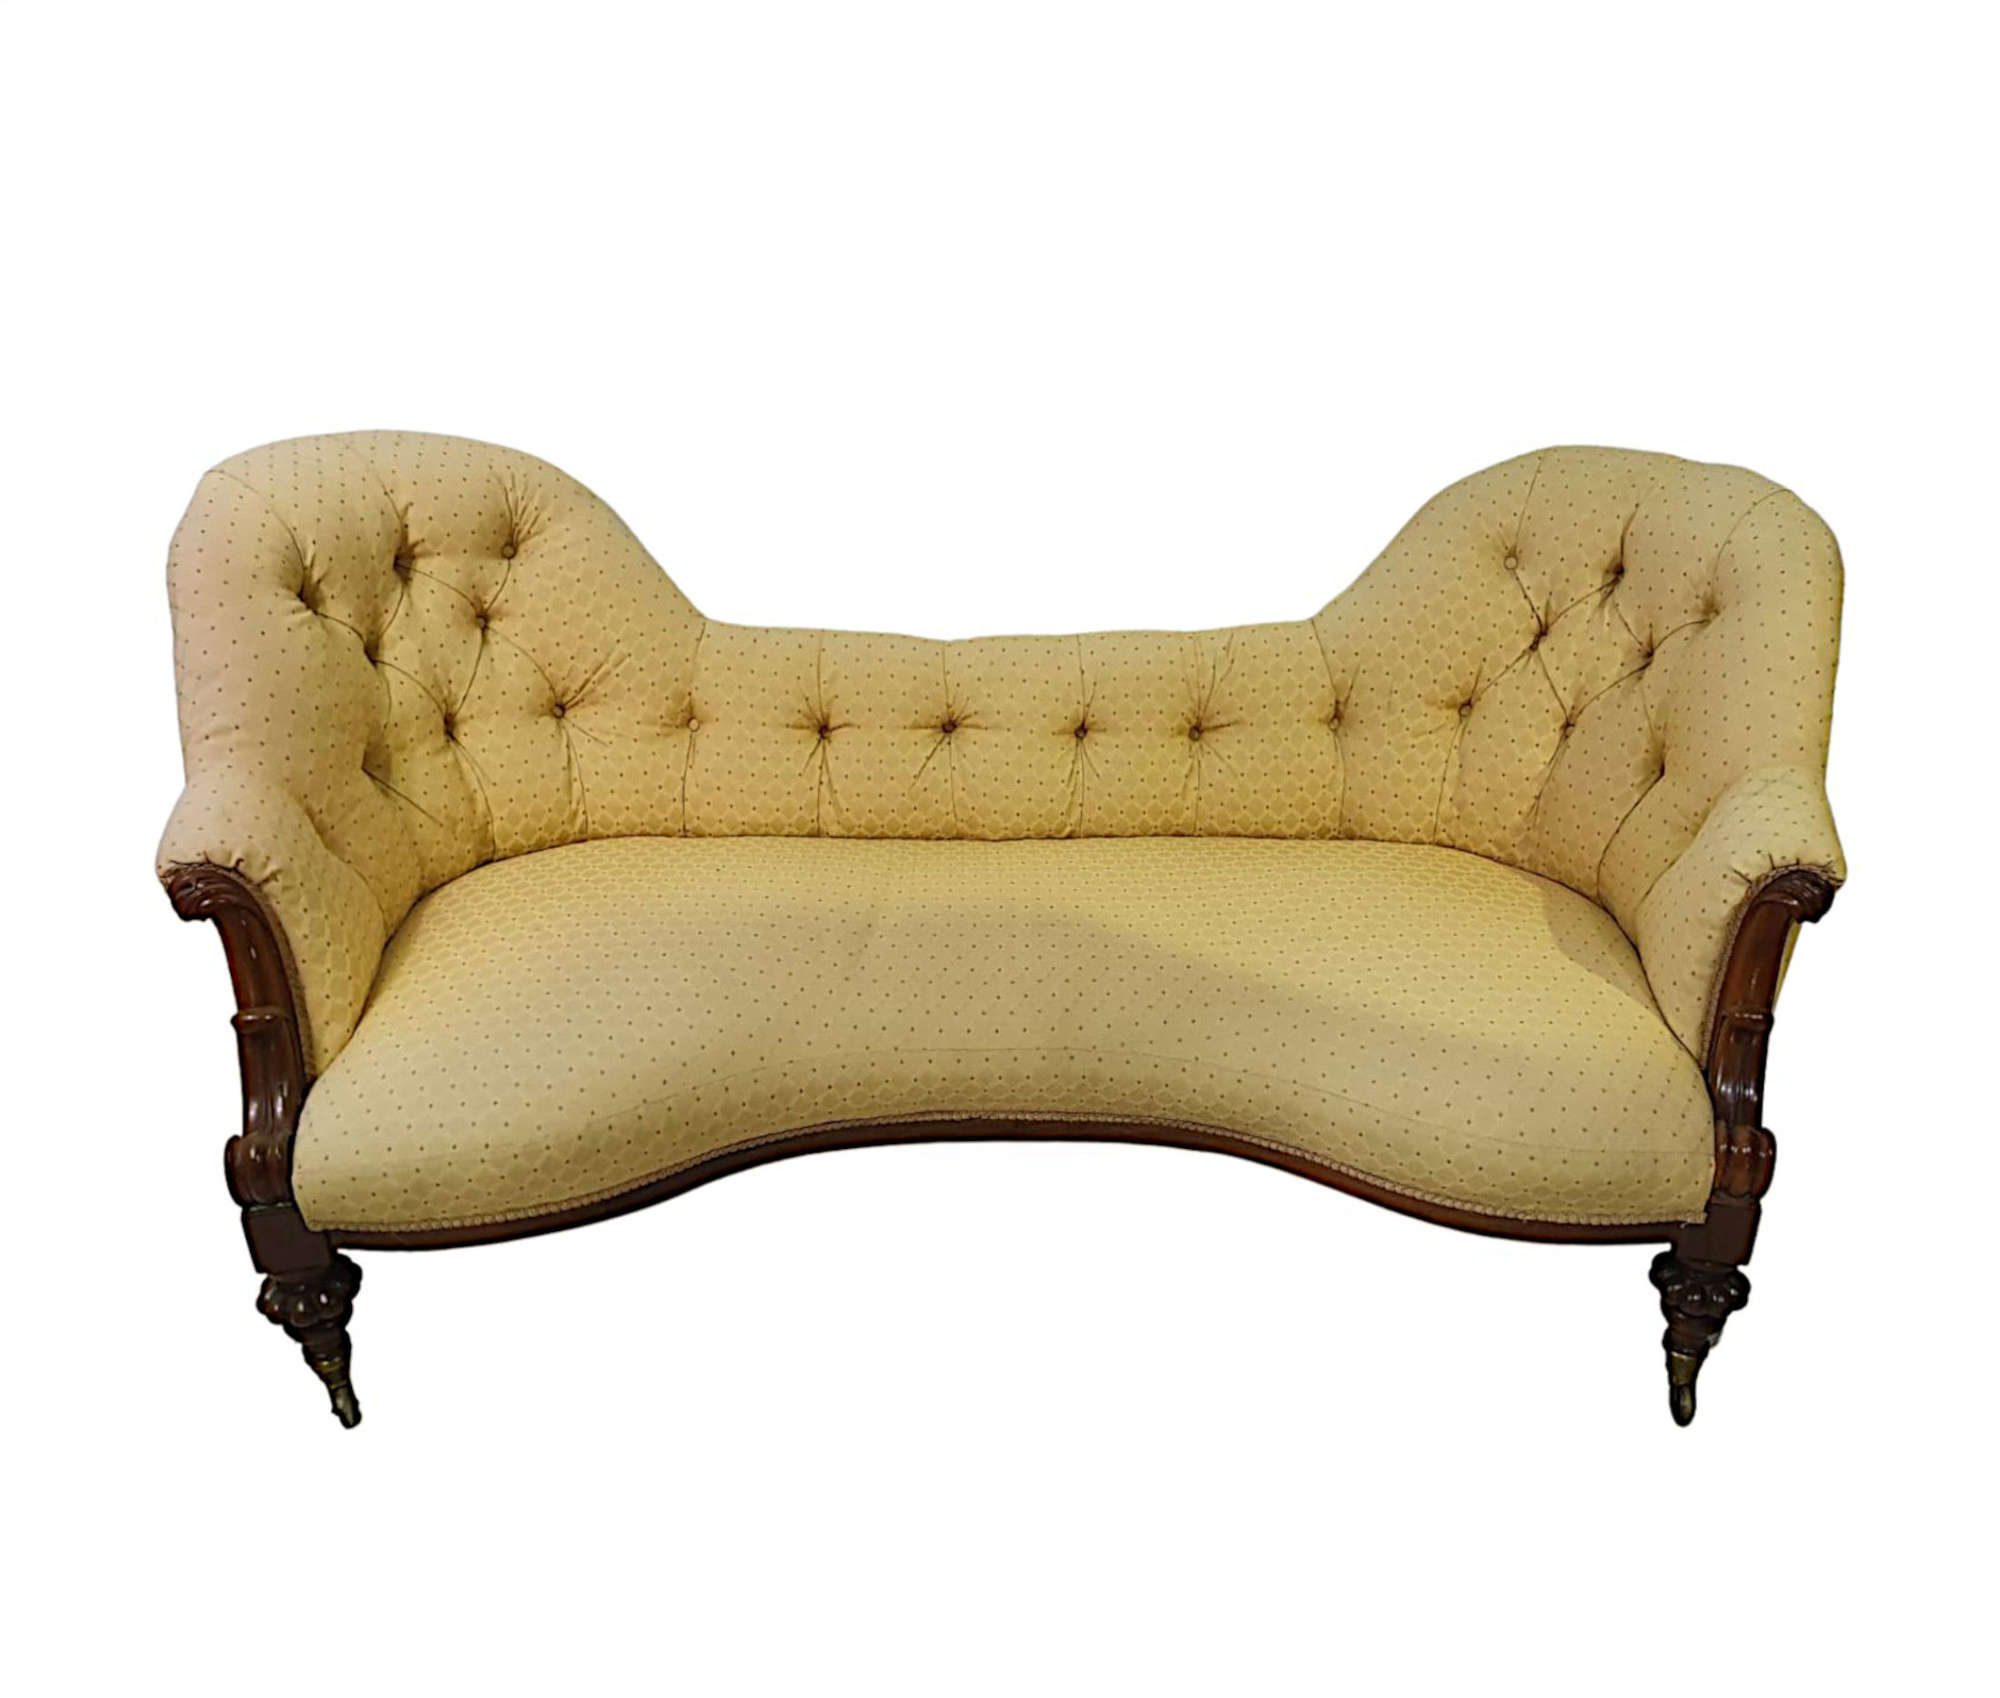 A Gorgeous 19th Century Humpback Settee